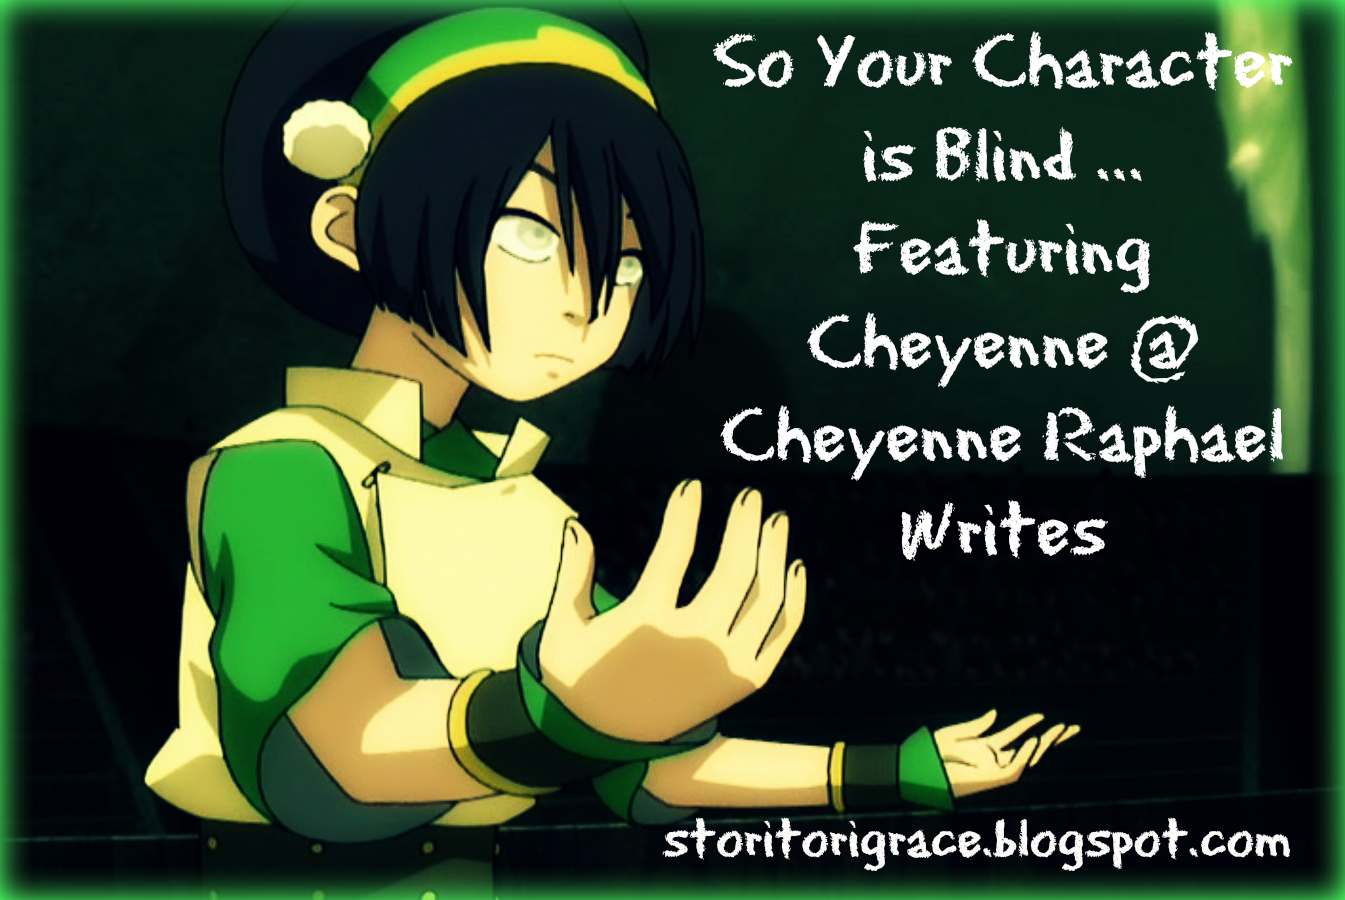 Wanderer S Pen So Your Character Is Blind Featuring Cheyenne Cheyenne Raphael Writes Jina Authors Inspirations Vote up your favorite anime characters with blinding bangs, and add any to the list that aren't already here. so your character is blind